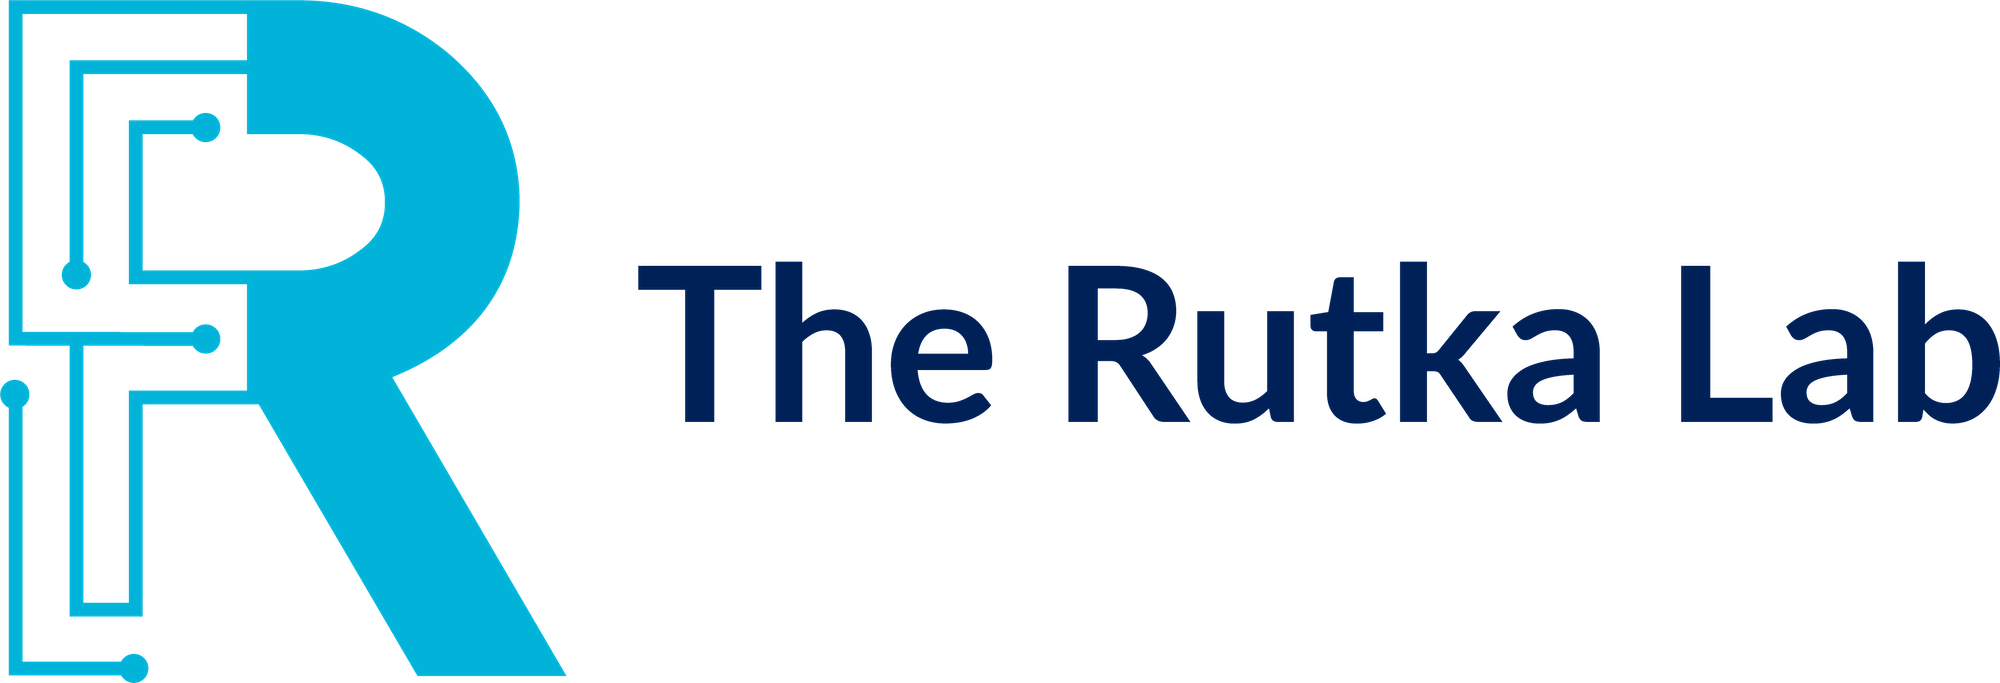 The Rutka Lab logo. On the left is a light blue capital R, the left half of the R is made of connected lines and dots. The Rutka Lab is written to the right in dark blue.